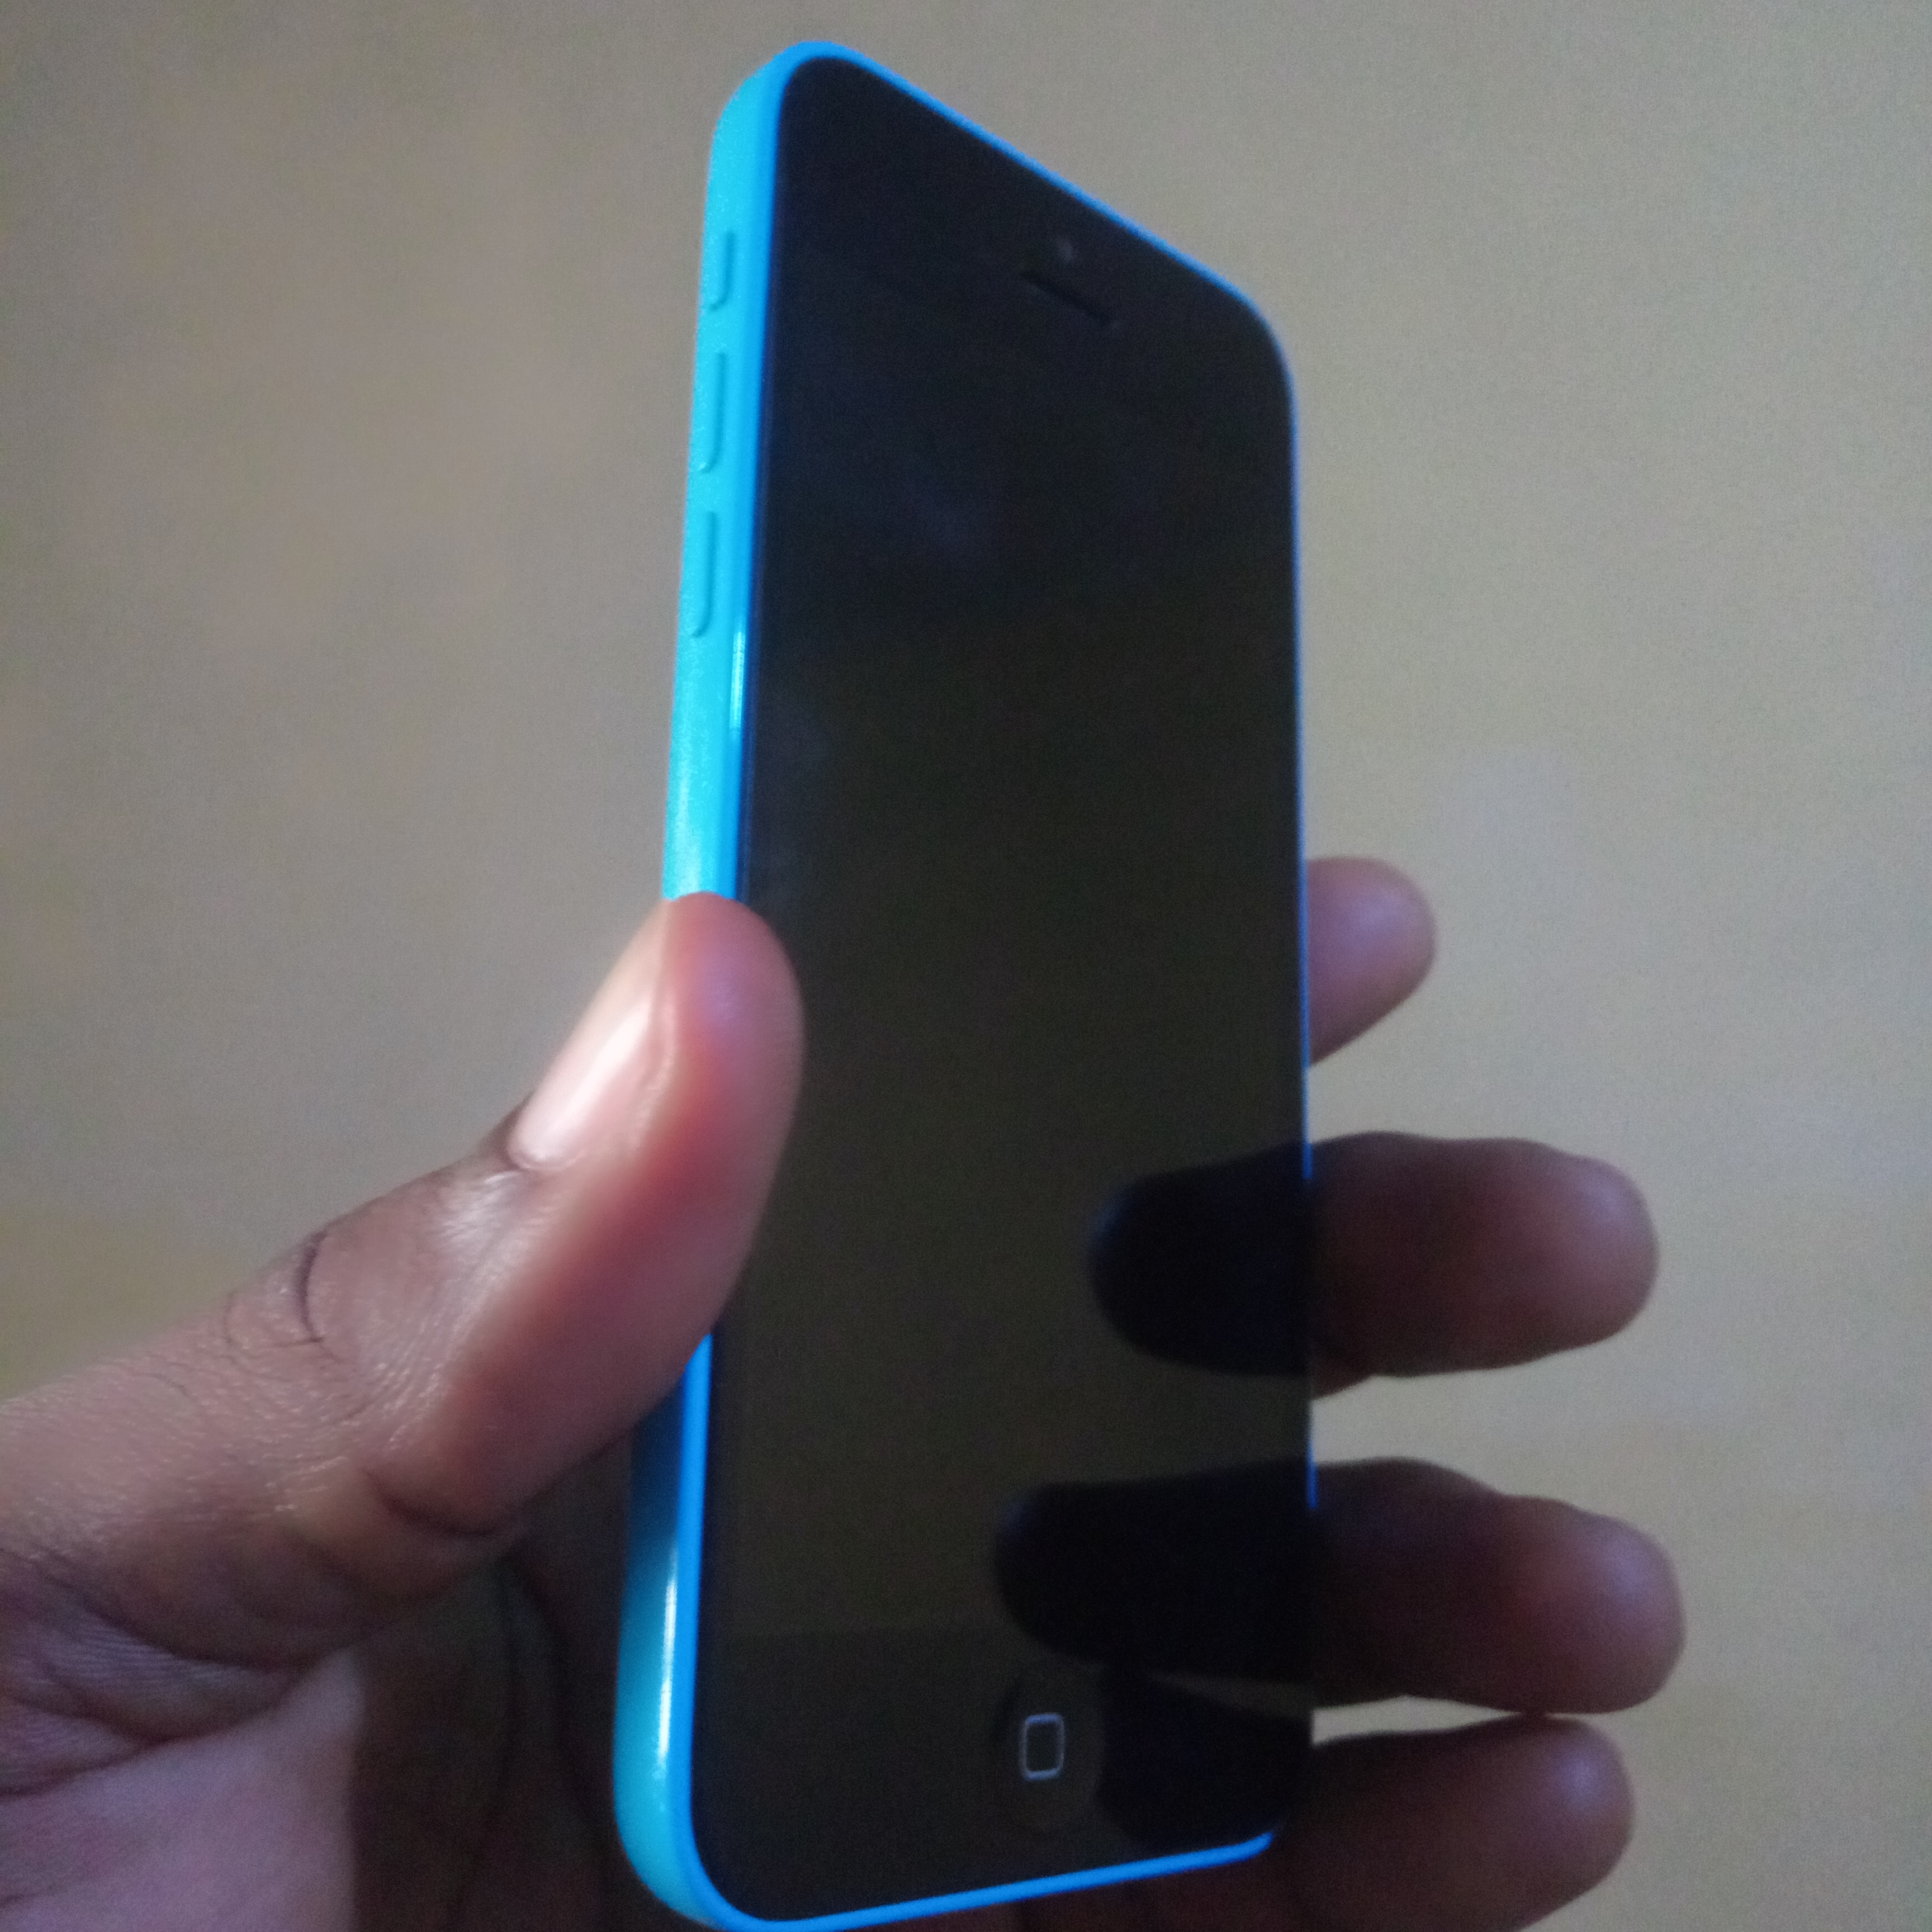 Iphone 5c phone; tablet